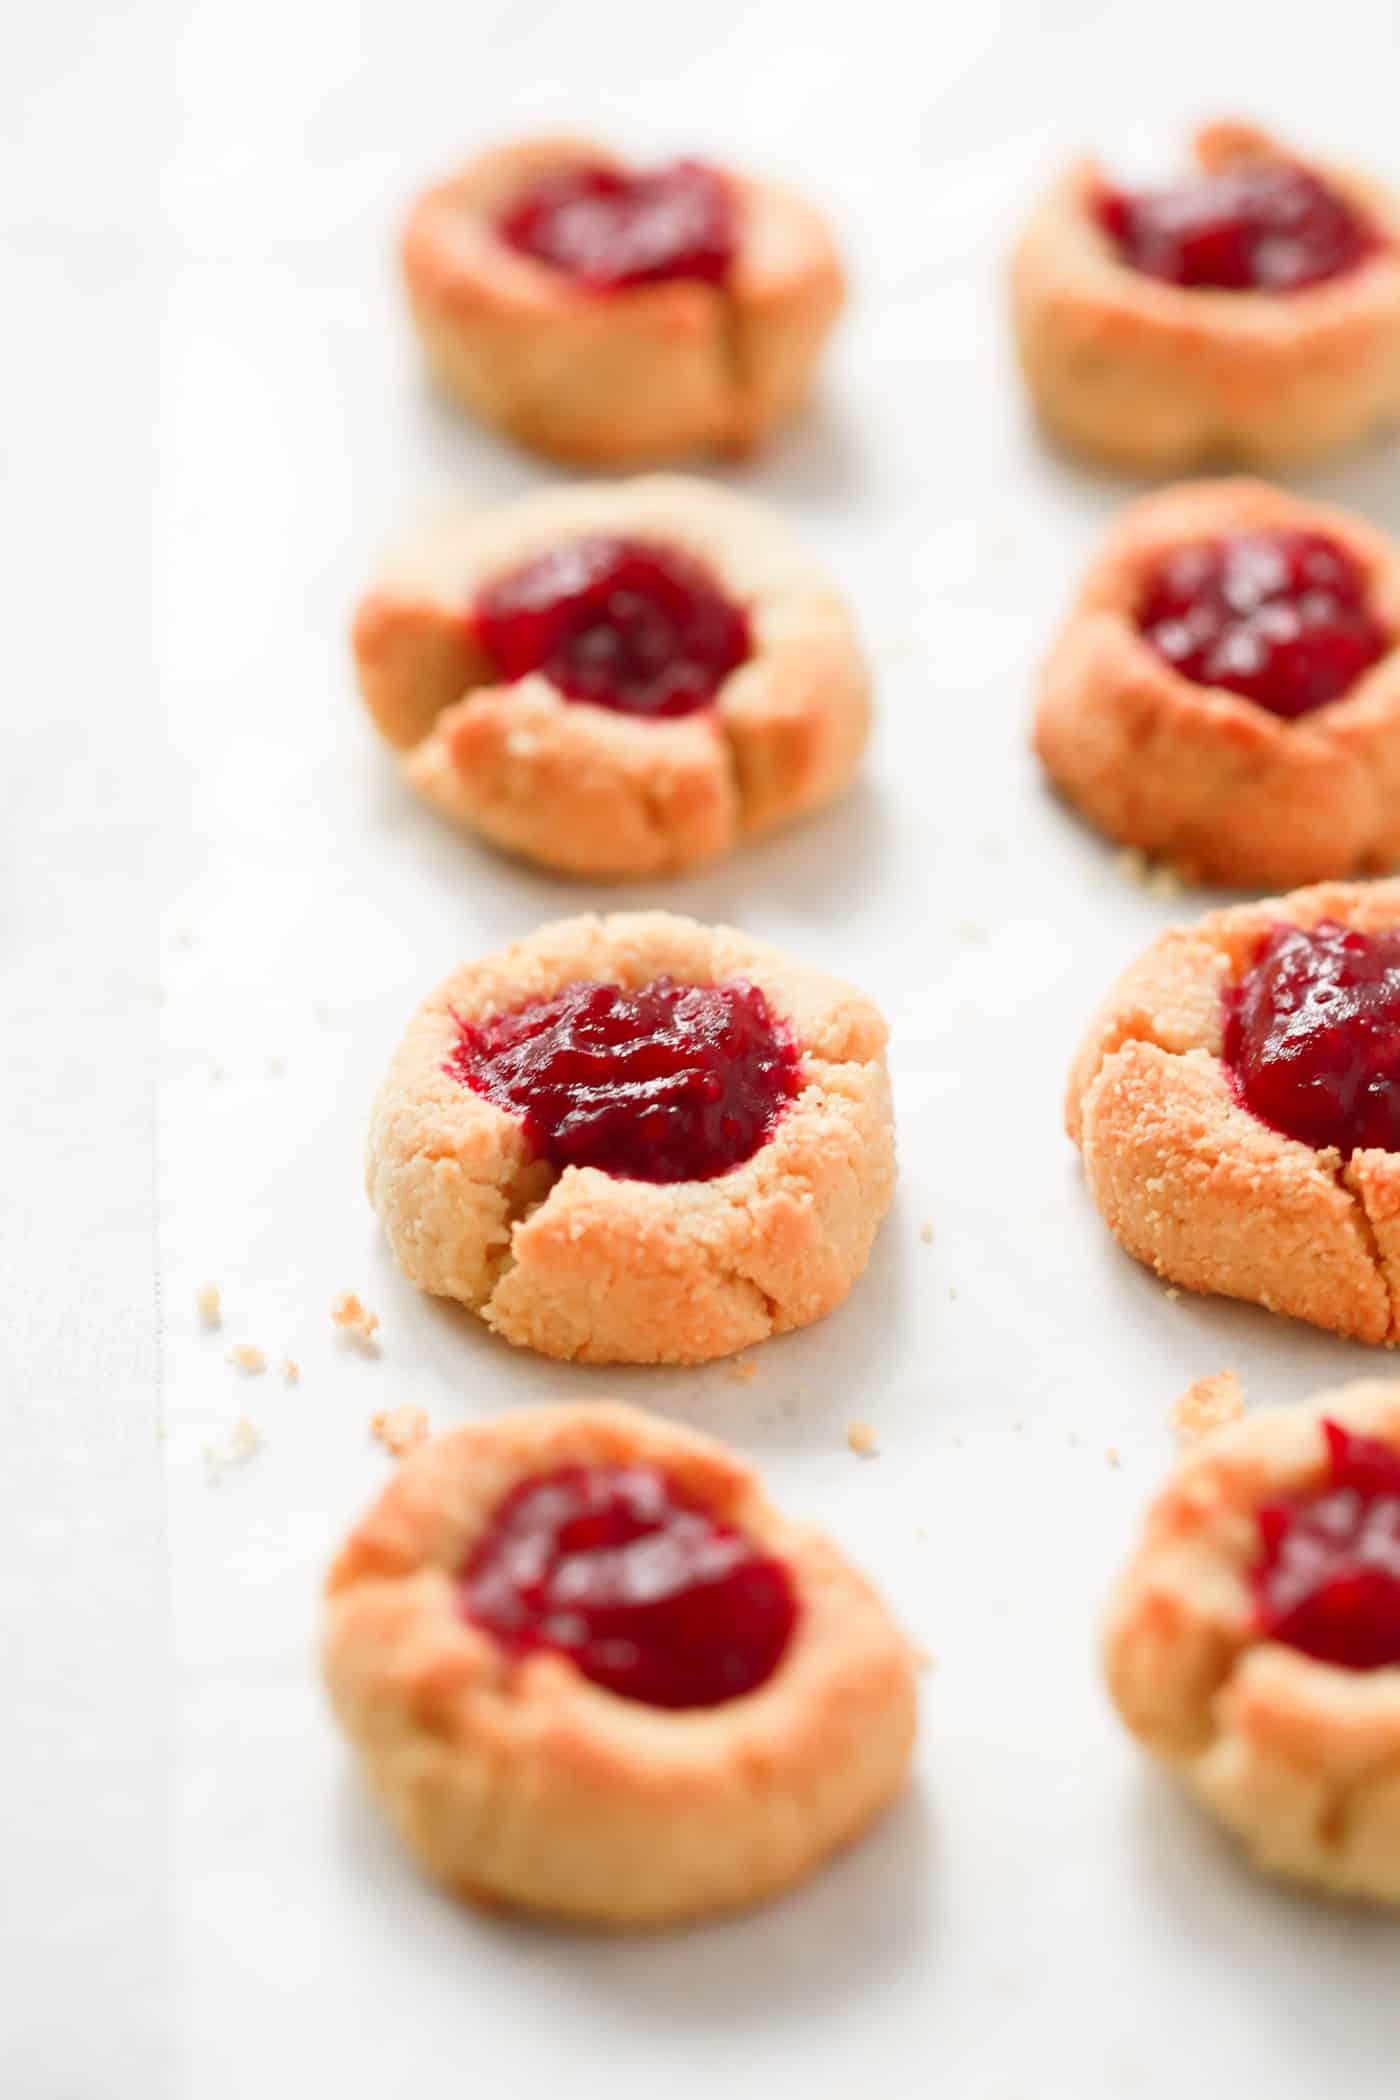 Delicious Low-carb Cranberry Thumbprint Cookies made with almond flour, butter, vanilla extract, natural sweetener and homemade cranberry sauce/jam. It’s gluten-free, sugar-free and tastes amazing!